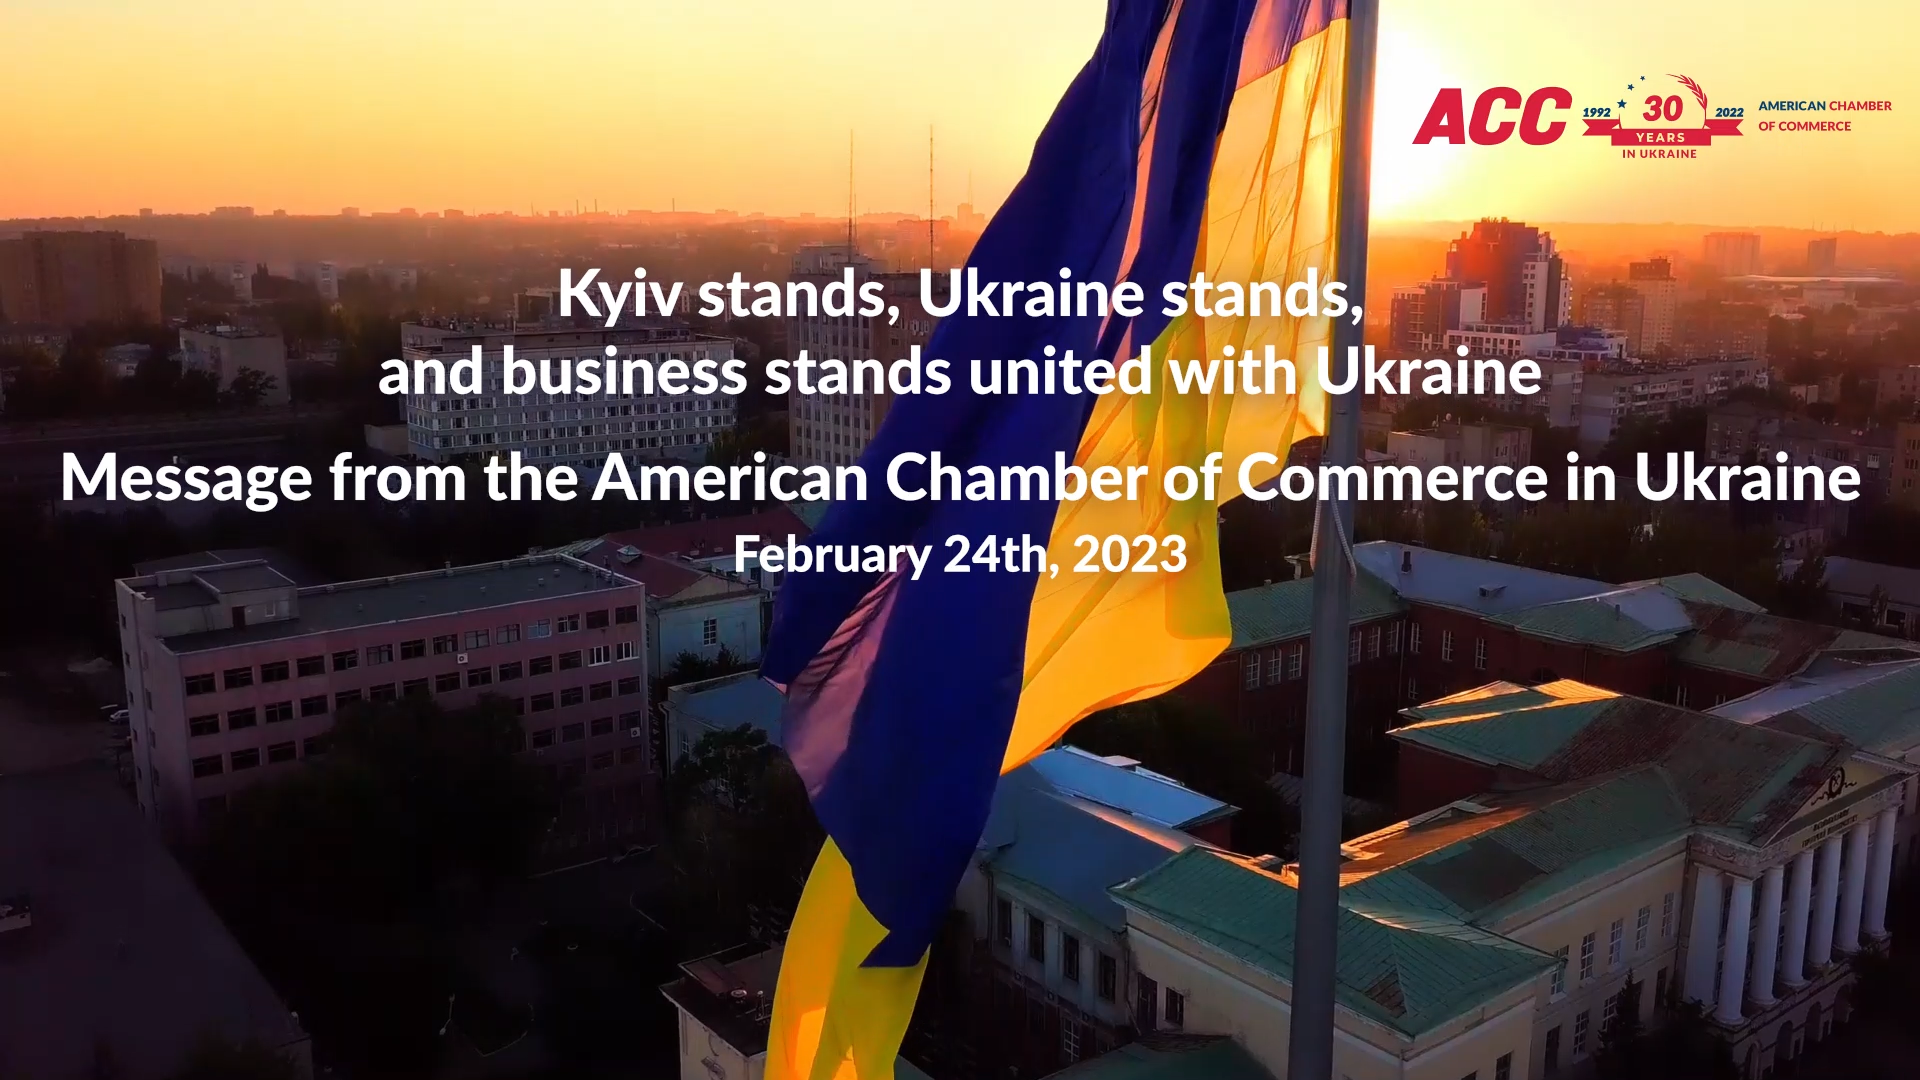 Kyiv stands, Ukraine stands, and business stands united with Ukraine